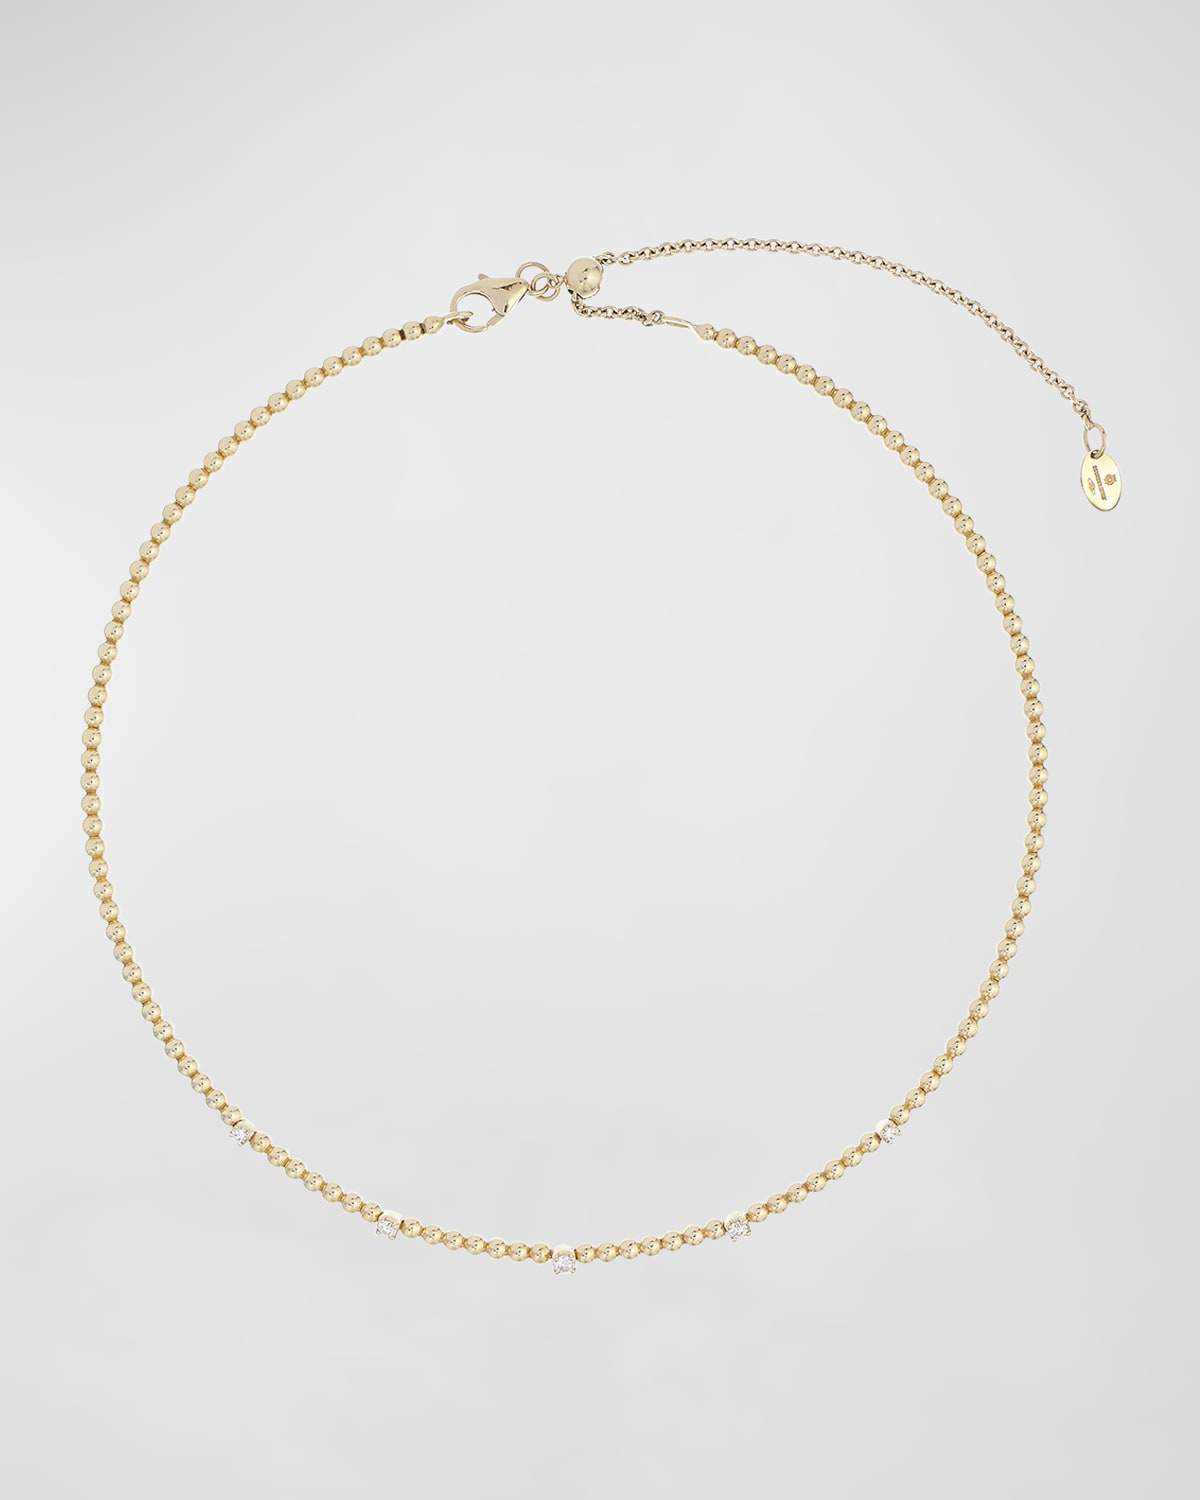 Krisonia 18k Yellow Gold Necklace With Diamonds